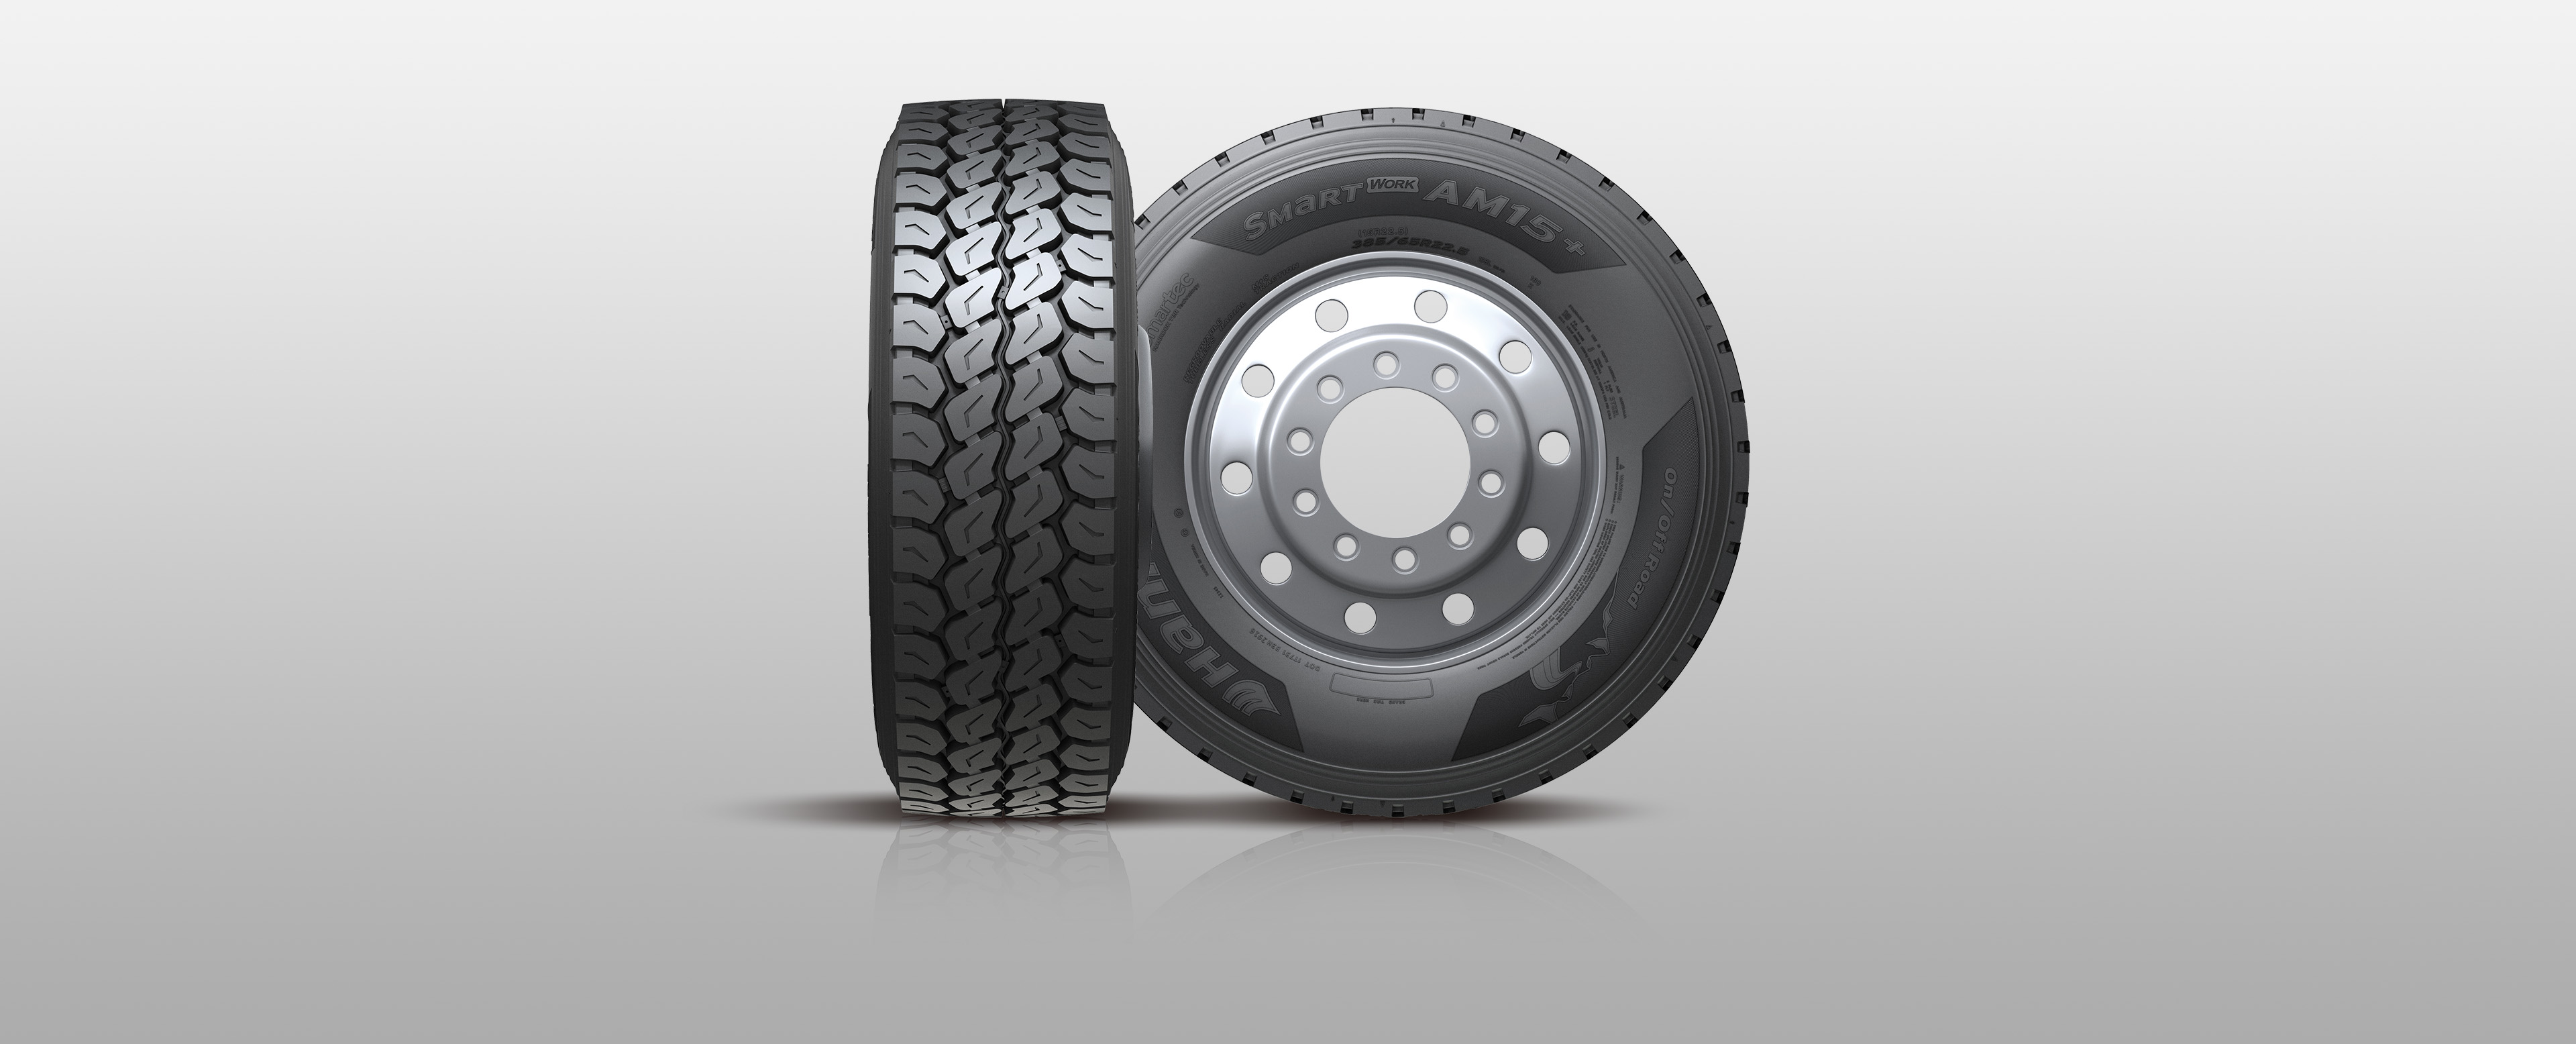 Hankook Tire & Technology-Tires-Smart-Smart Work-AM15plus-All position radial tire for on and off road